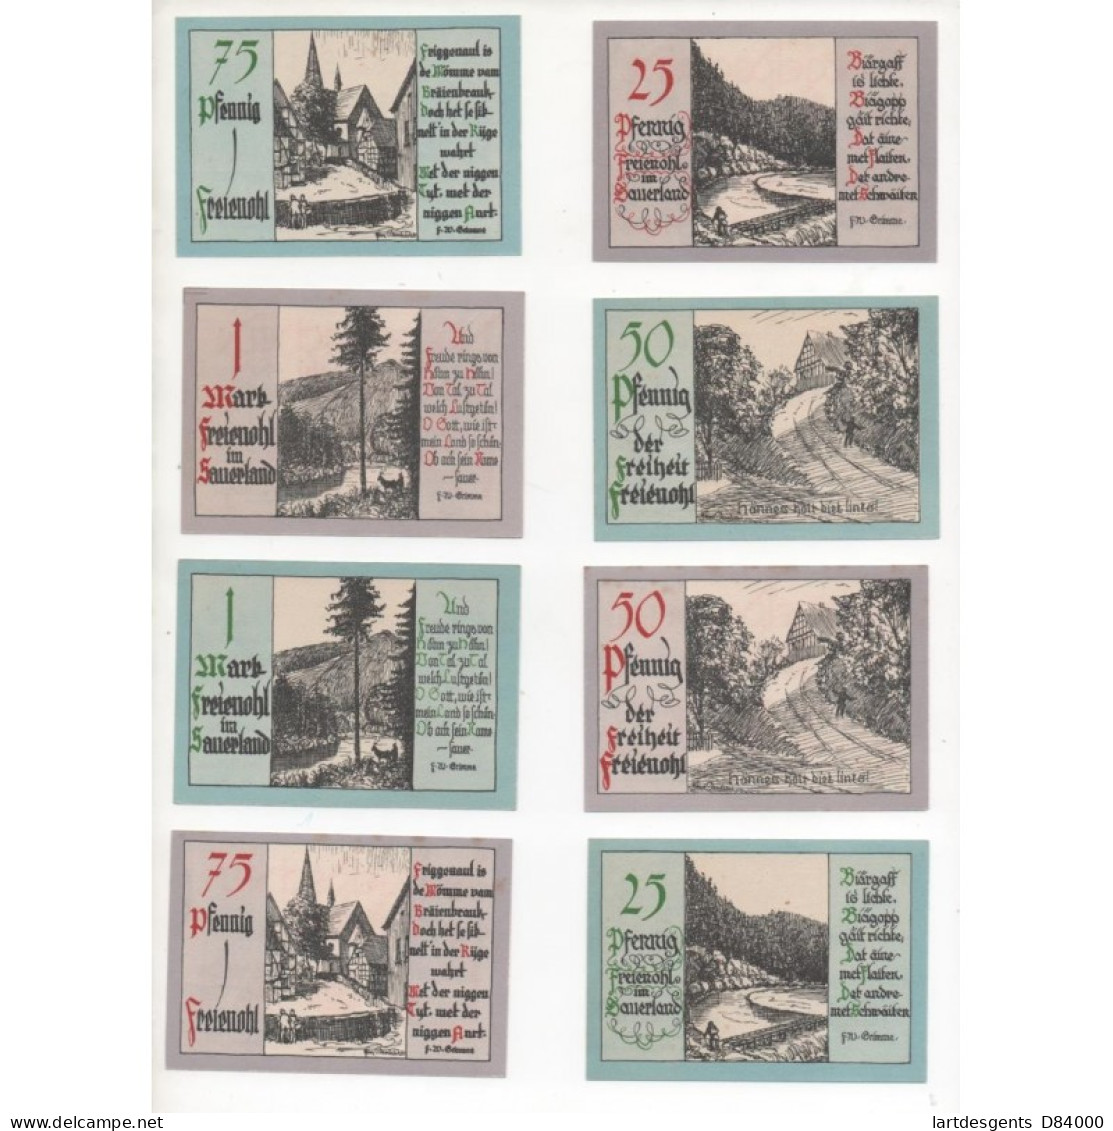 NOTGELD - FREIENOLH - 16 Different Notes - SERIE COMPLETE (F058) - [11] Emissions Locales